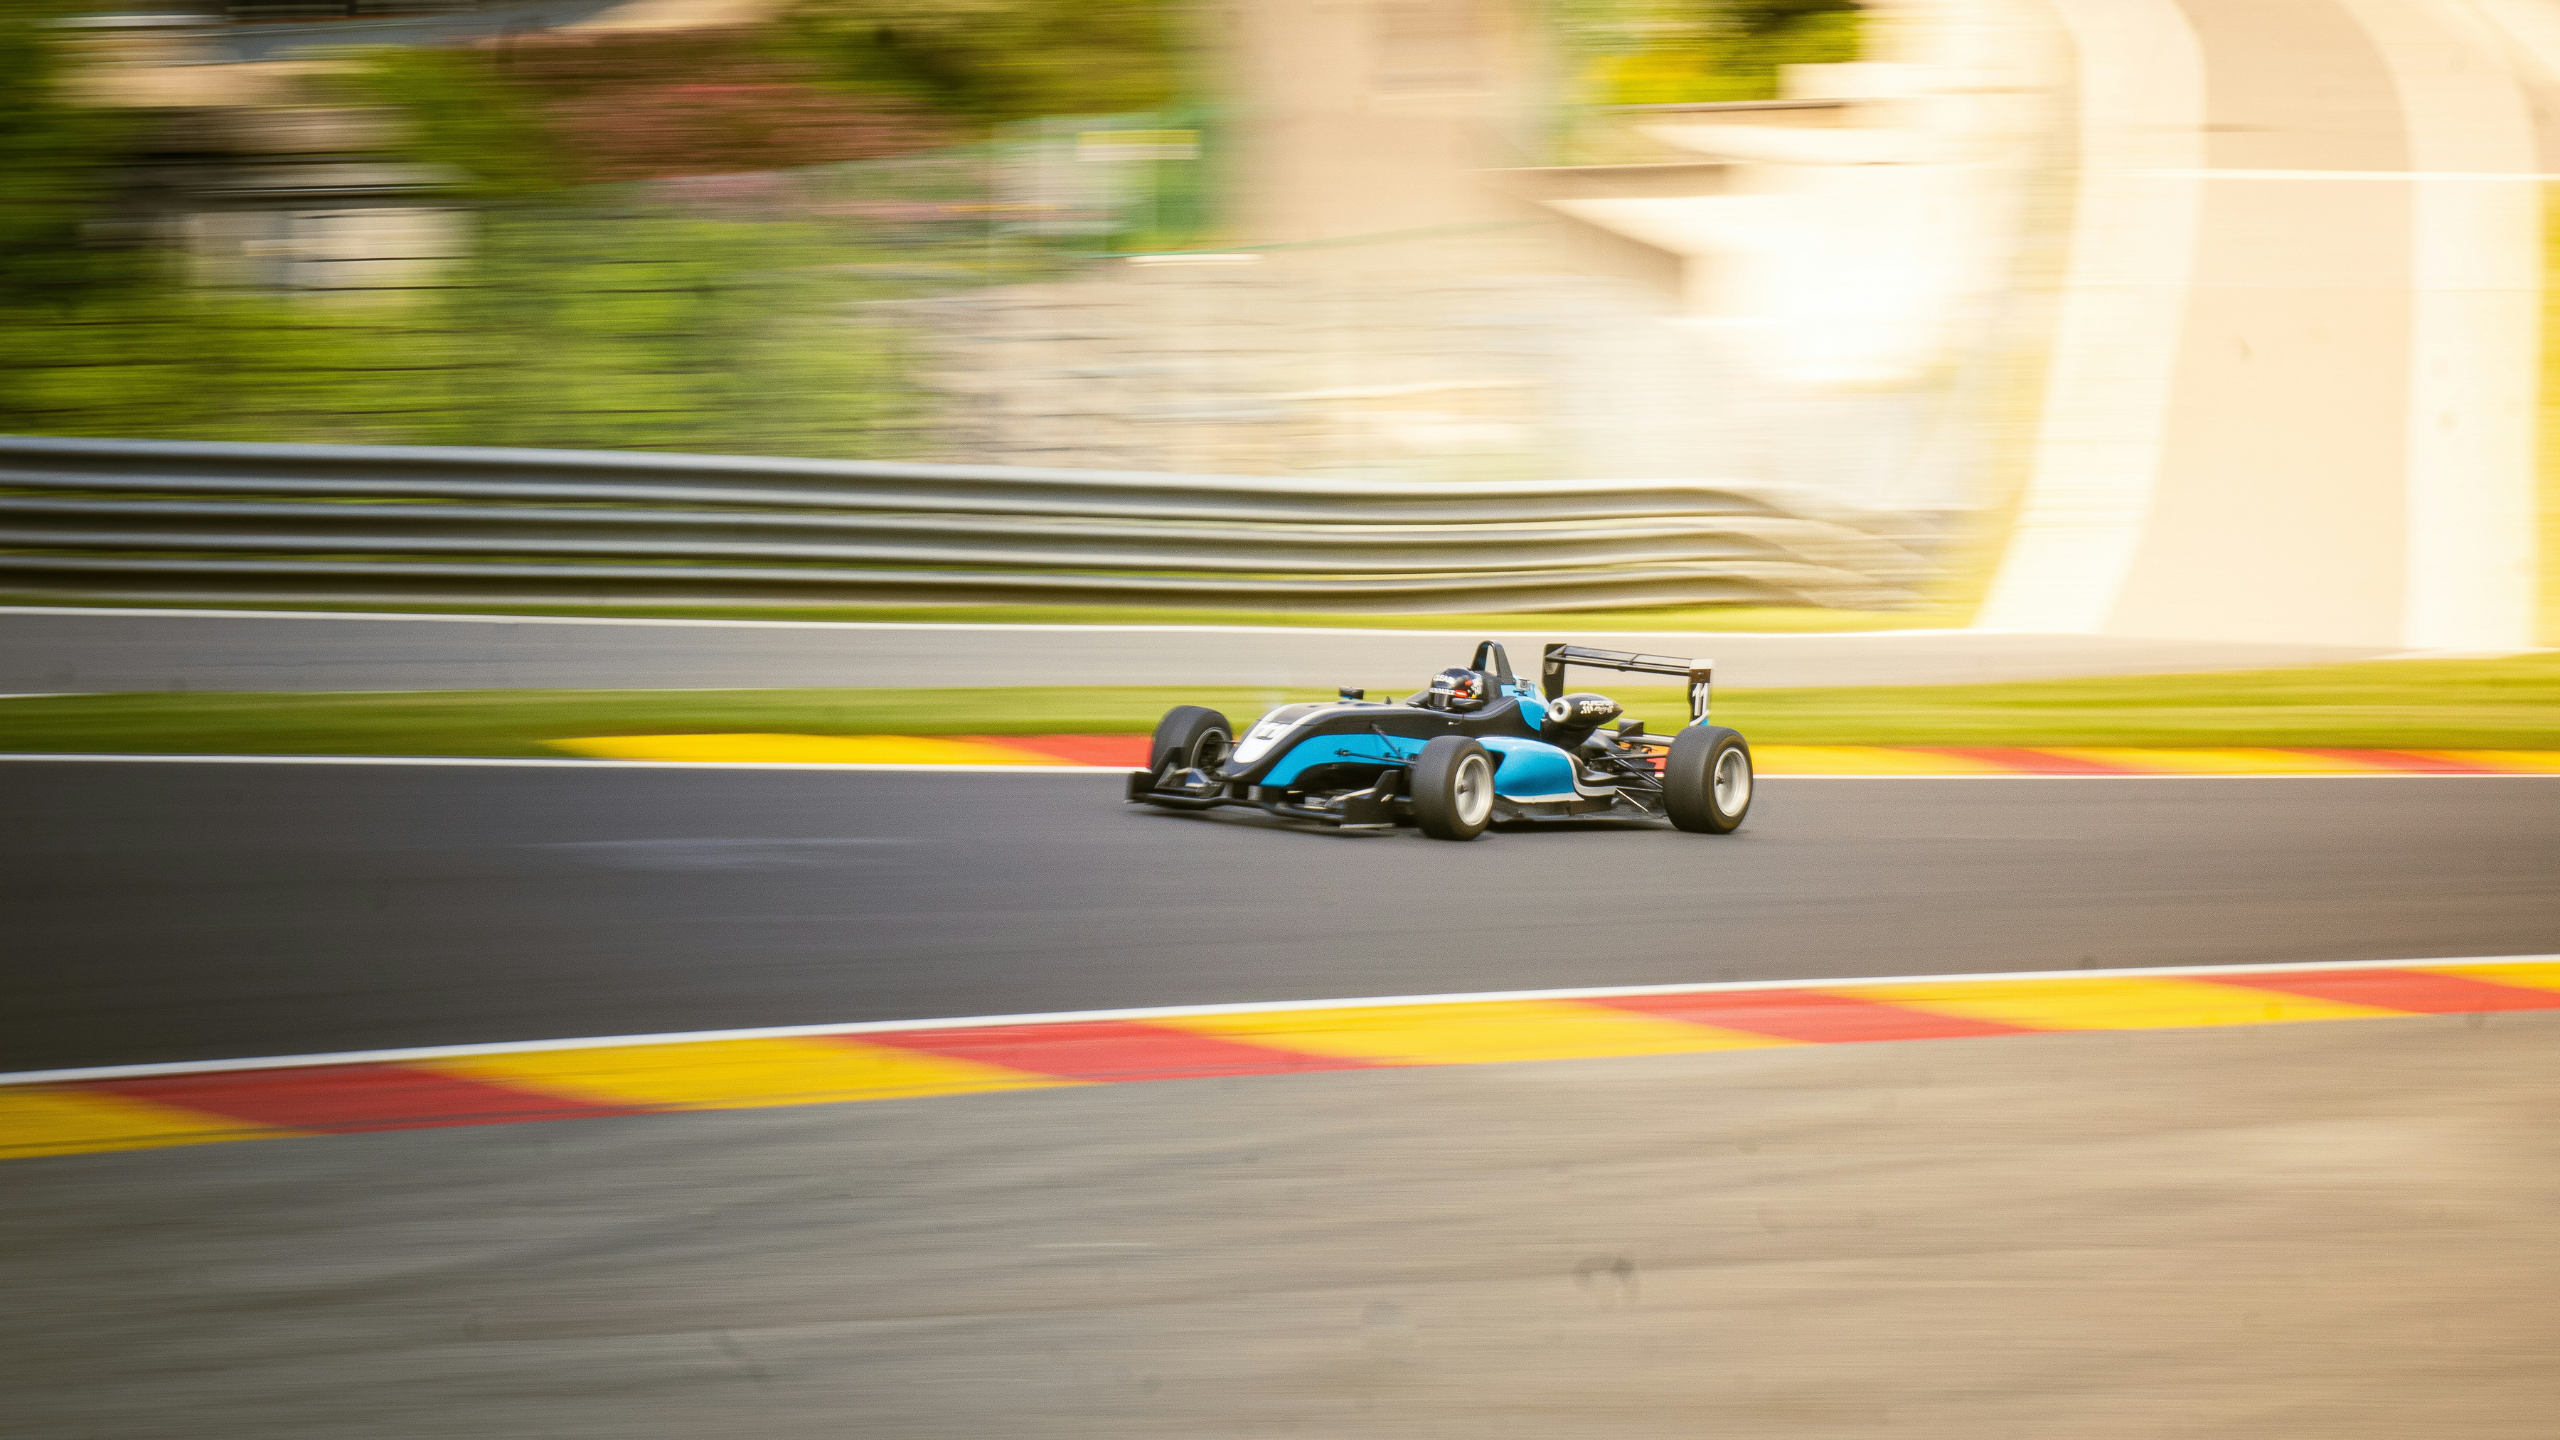 A formula 1 car alone on a race track. The bckground is blurred, indicting that the car is moving very quickly and is ahead of the other cars.